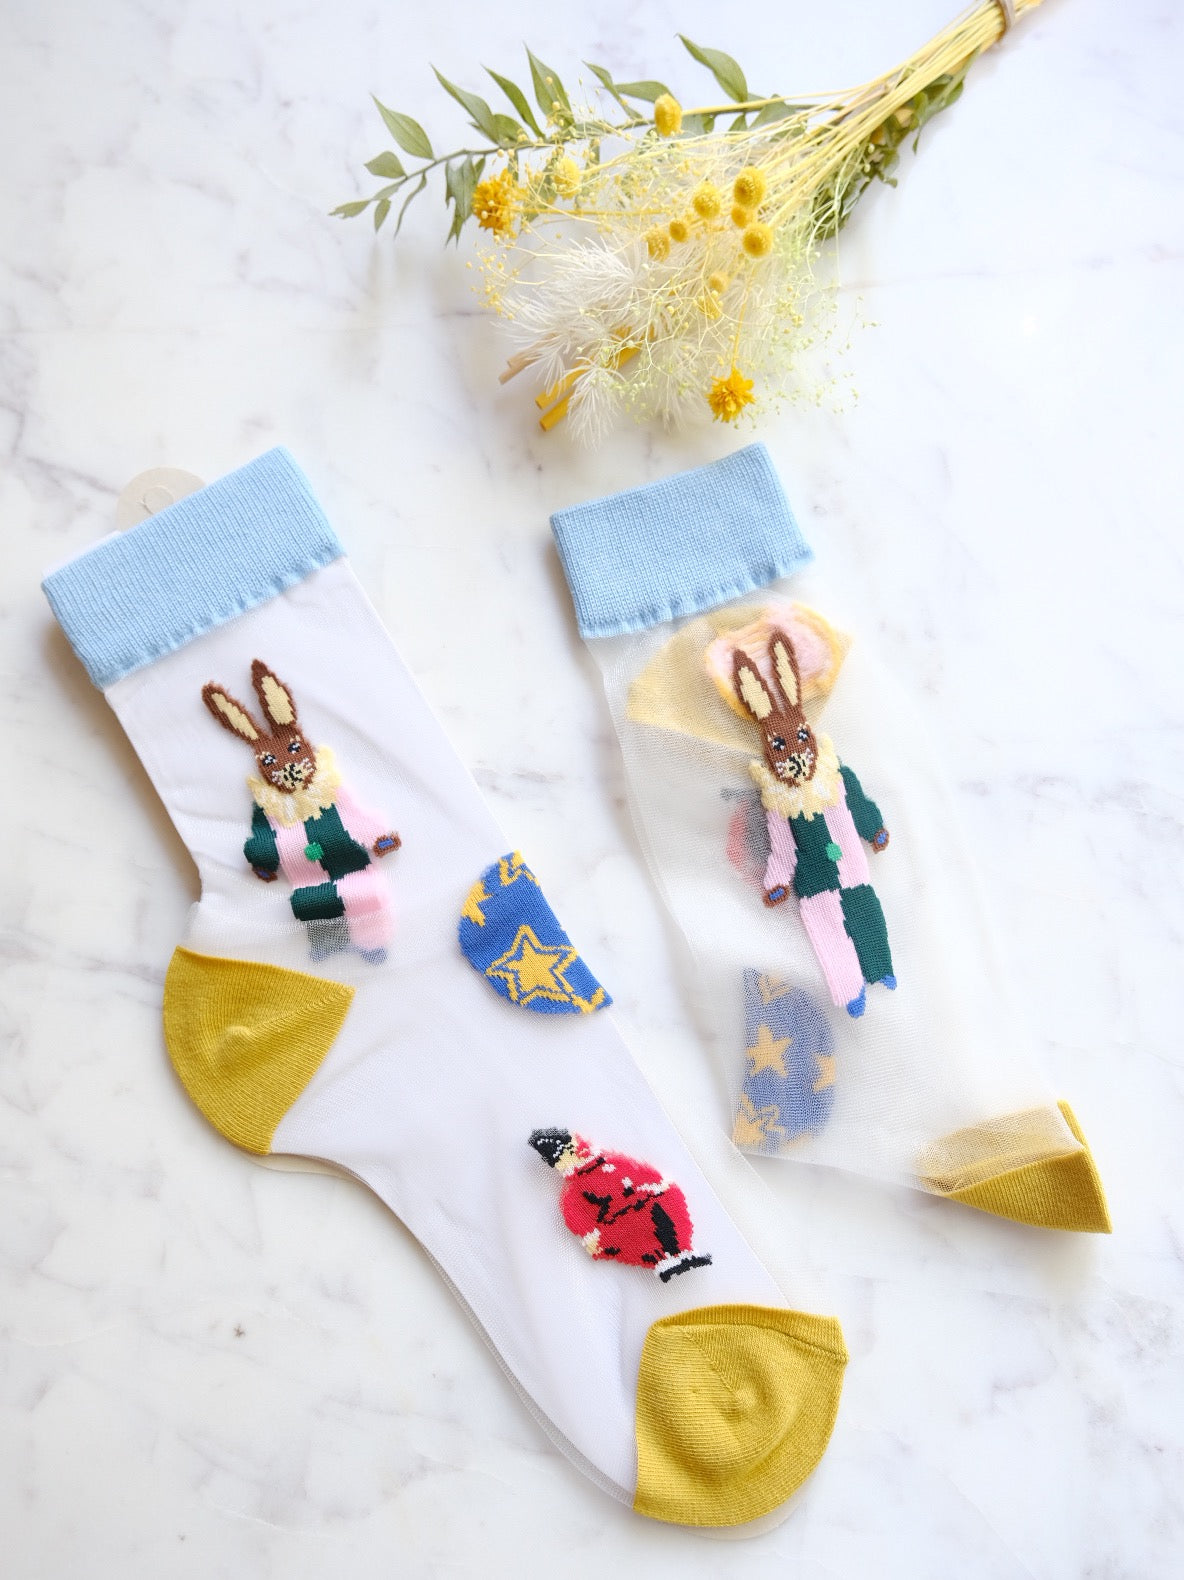 Miss June’s | Women’s Glass Silk-like Transparent socks | Cute | Colorful | Summer | Patterned | Gift Idea | Casual | Bunny lover | animal|